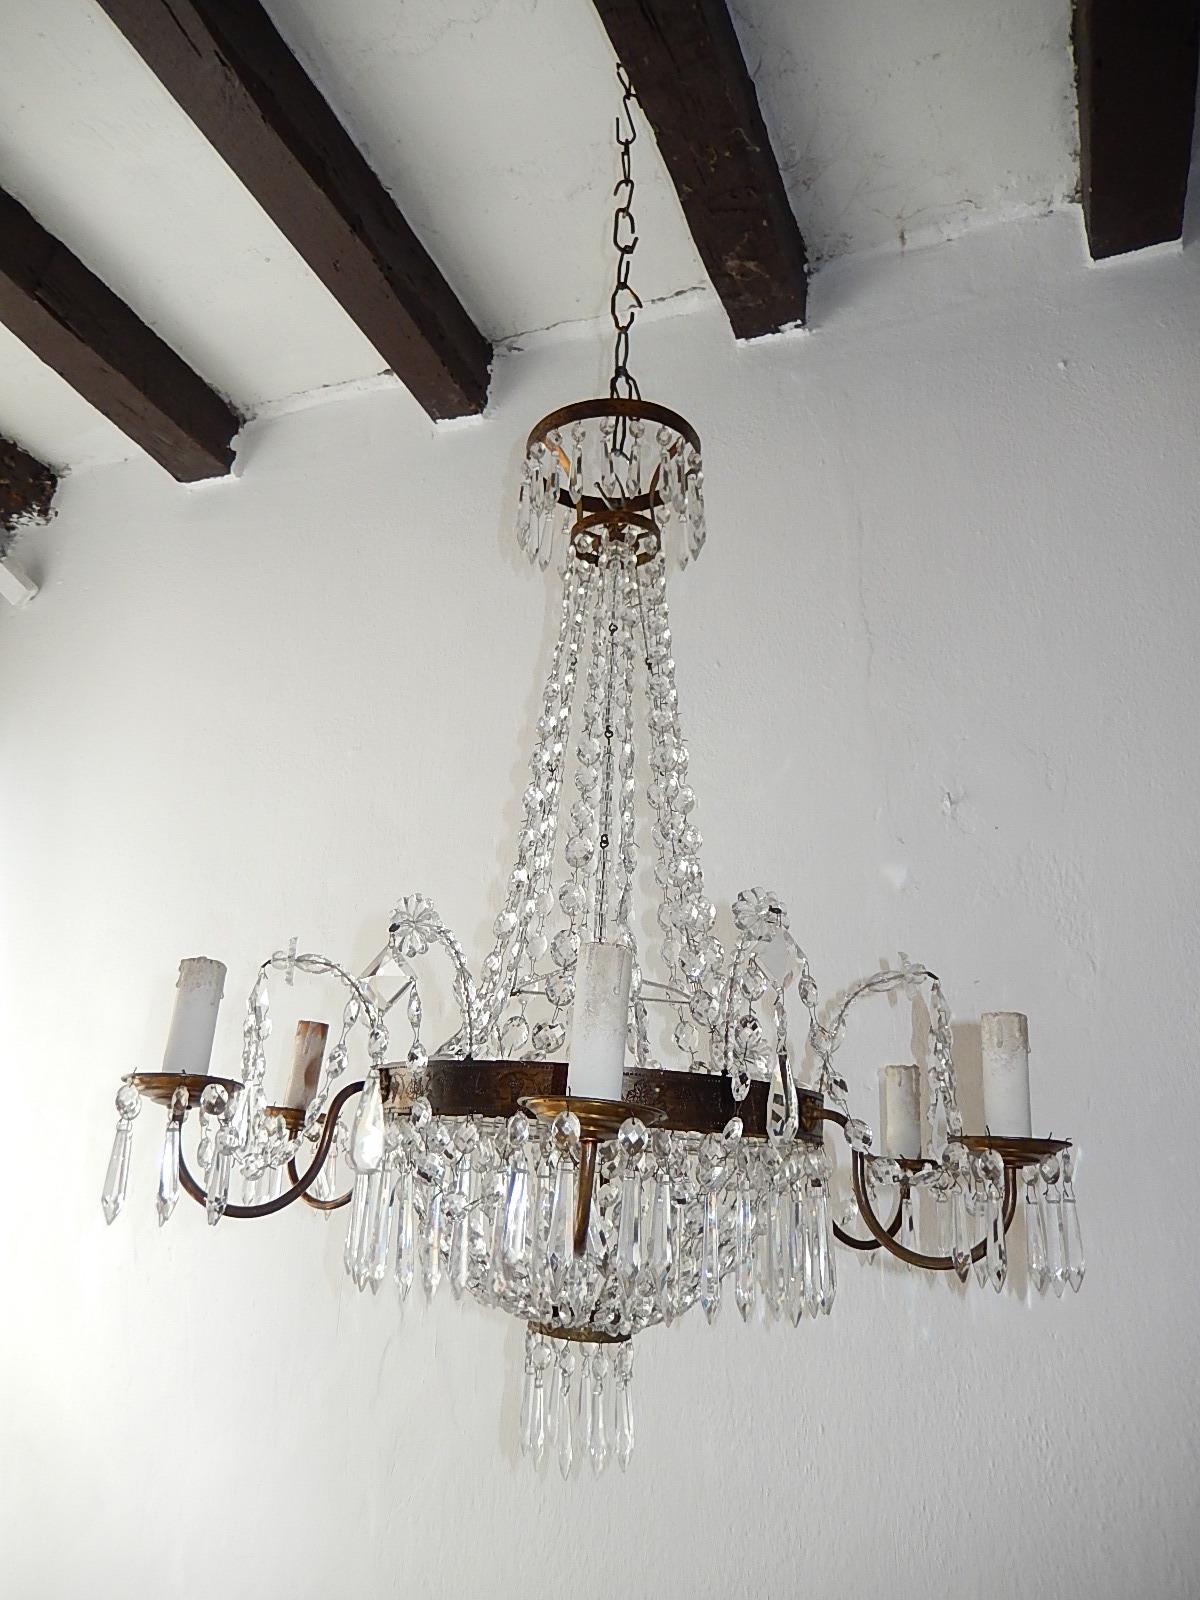 Housing six lights. Crystal prisms throughout with a dome bottom and swags of crystals each hand tied. Marked inside. Floret beading projecting out that are detachable. Original chain and canopy still intact. Re-wired and ready to hang. Free